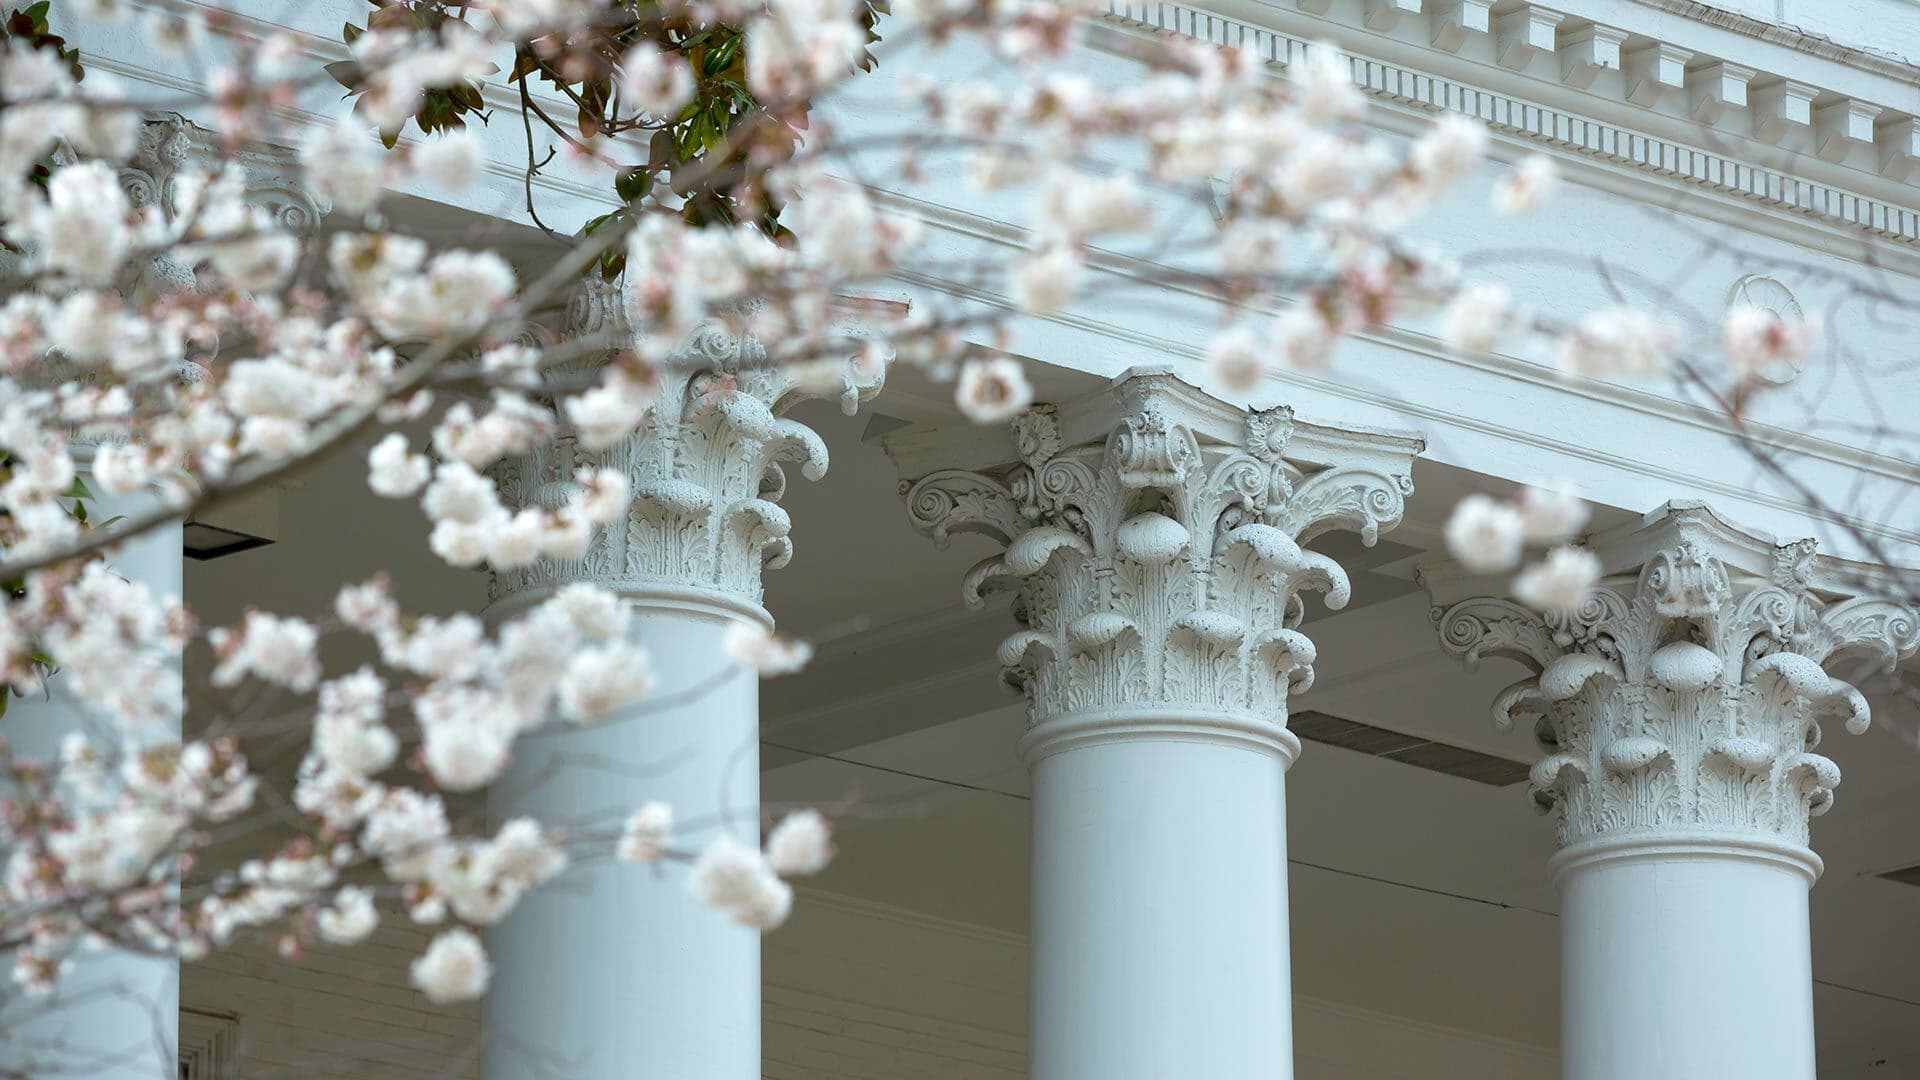 Delicate cherry blossoms in foreground, ornate Georgian columns in backgrond